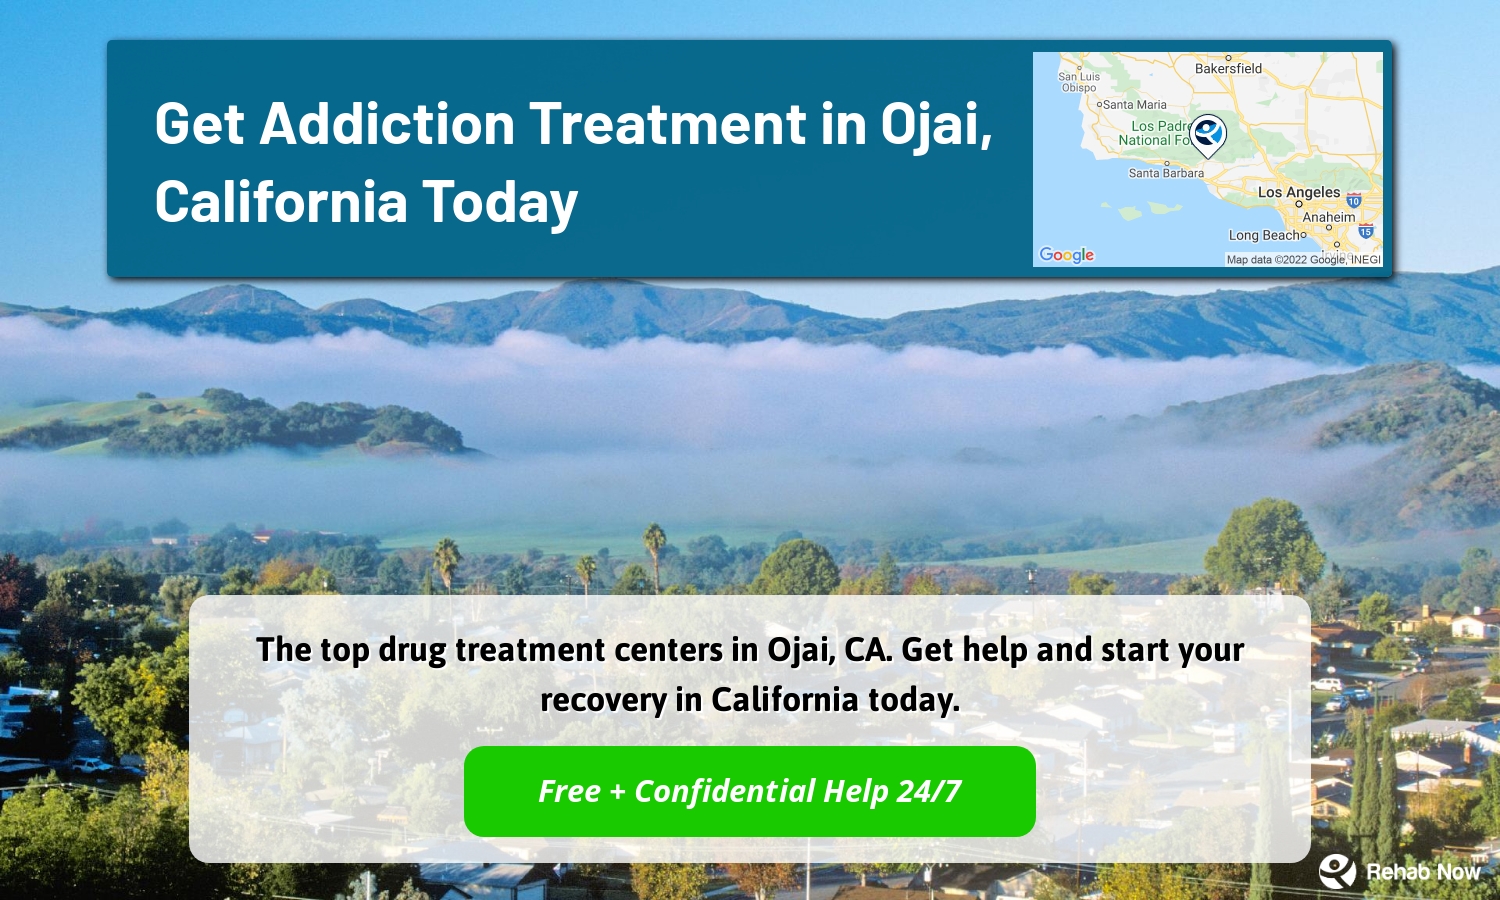 The top drug treatment centers in Ojai, CA. Get help and start your recovery in California today.